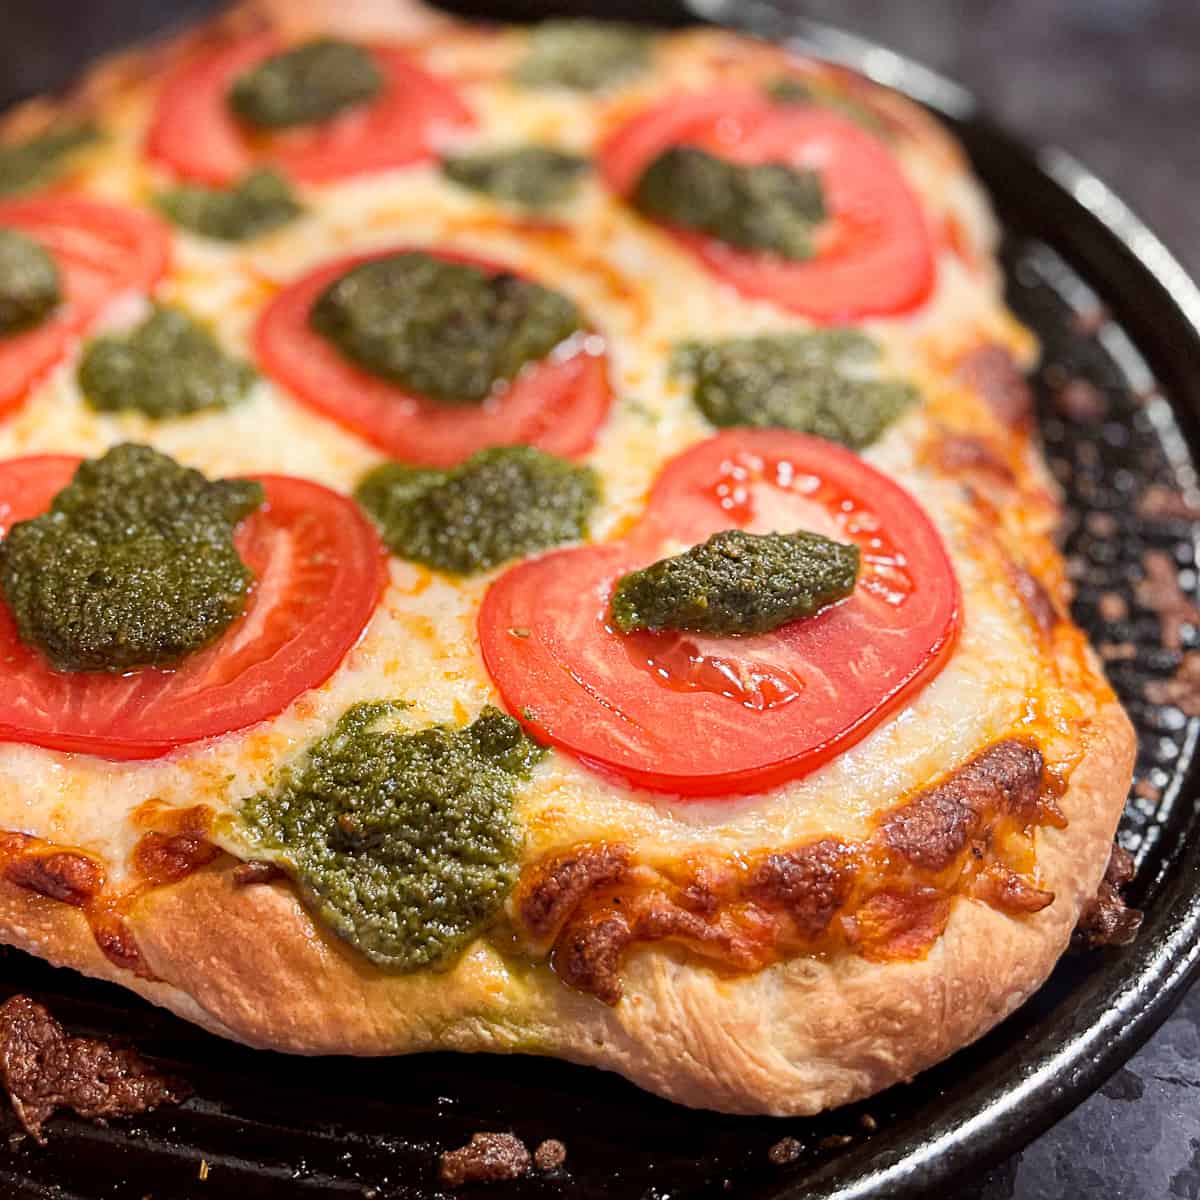 Pizza Stone Oven Baked Pesto Pizza With Tomatoes And Mozzarella Cheese